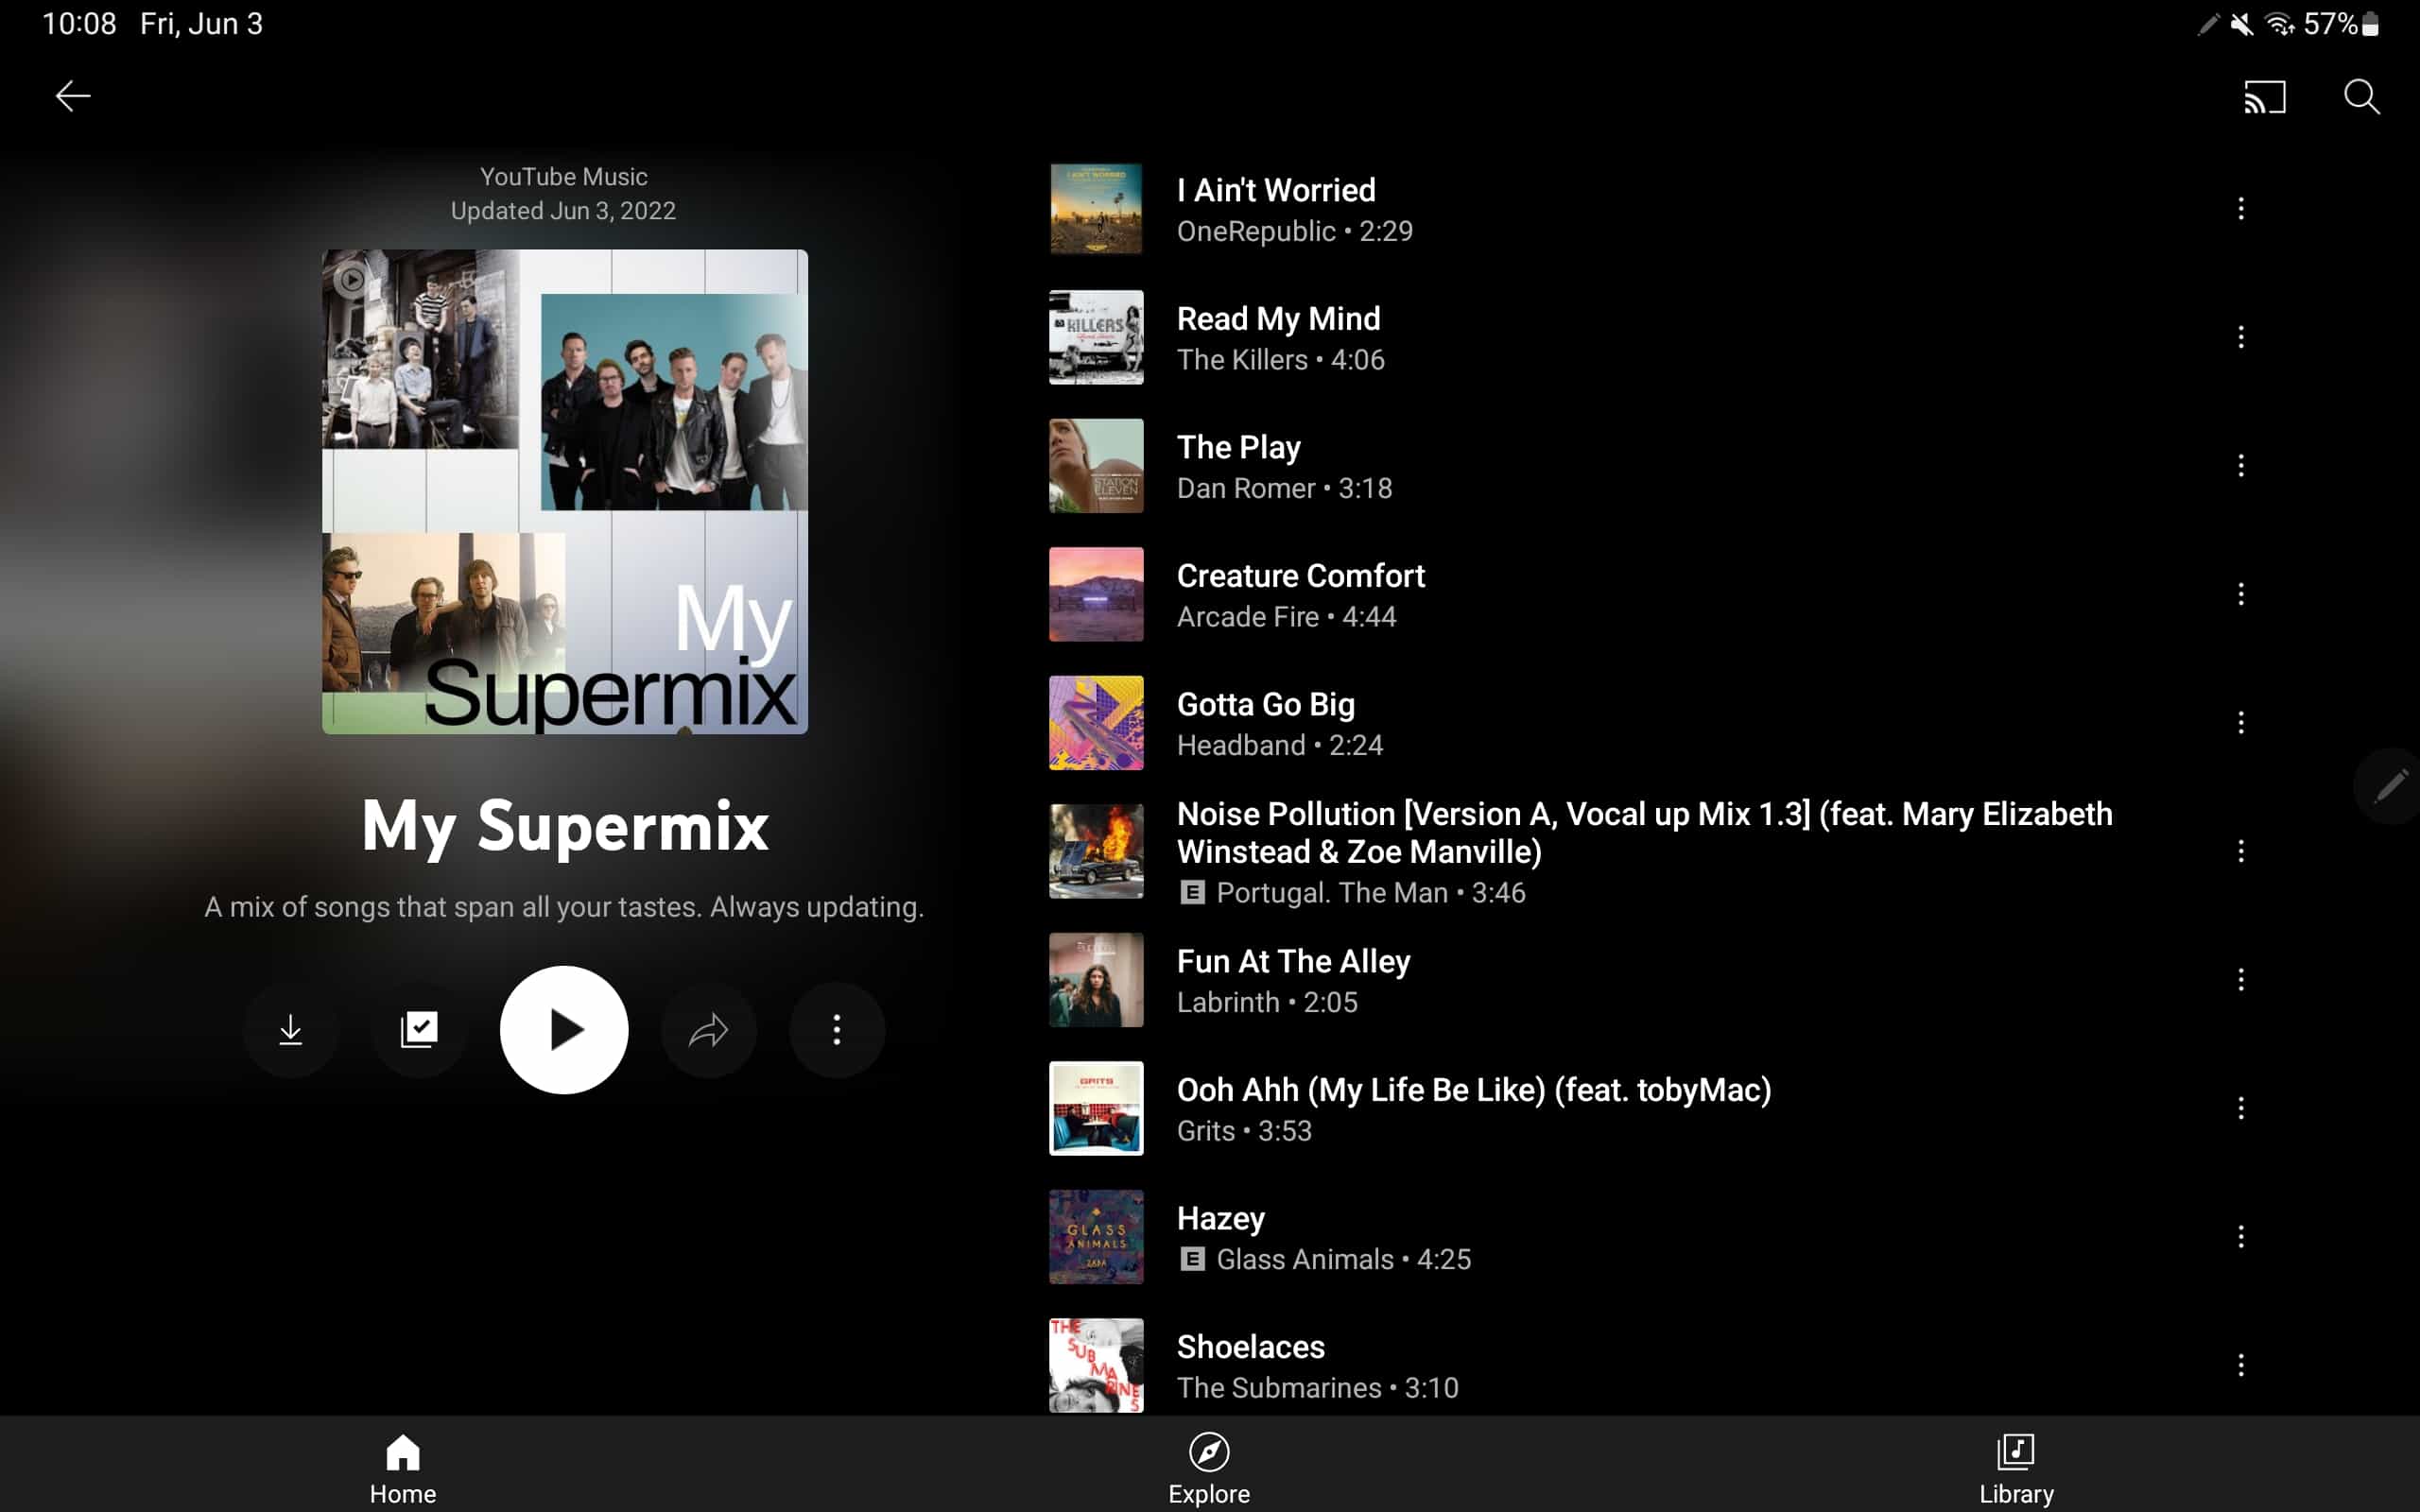 YouTube Music tablet playlist